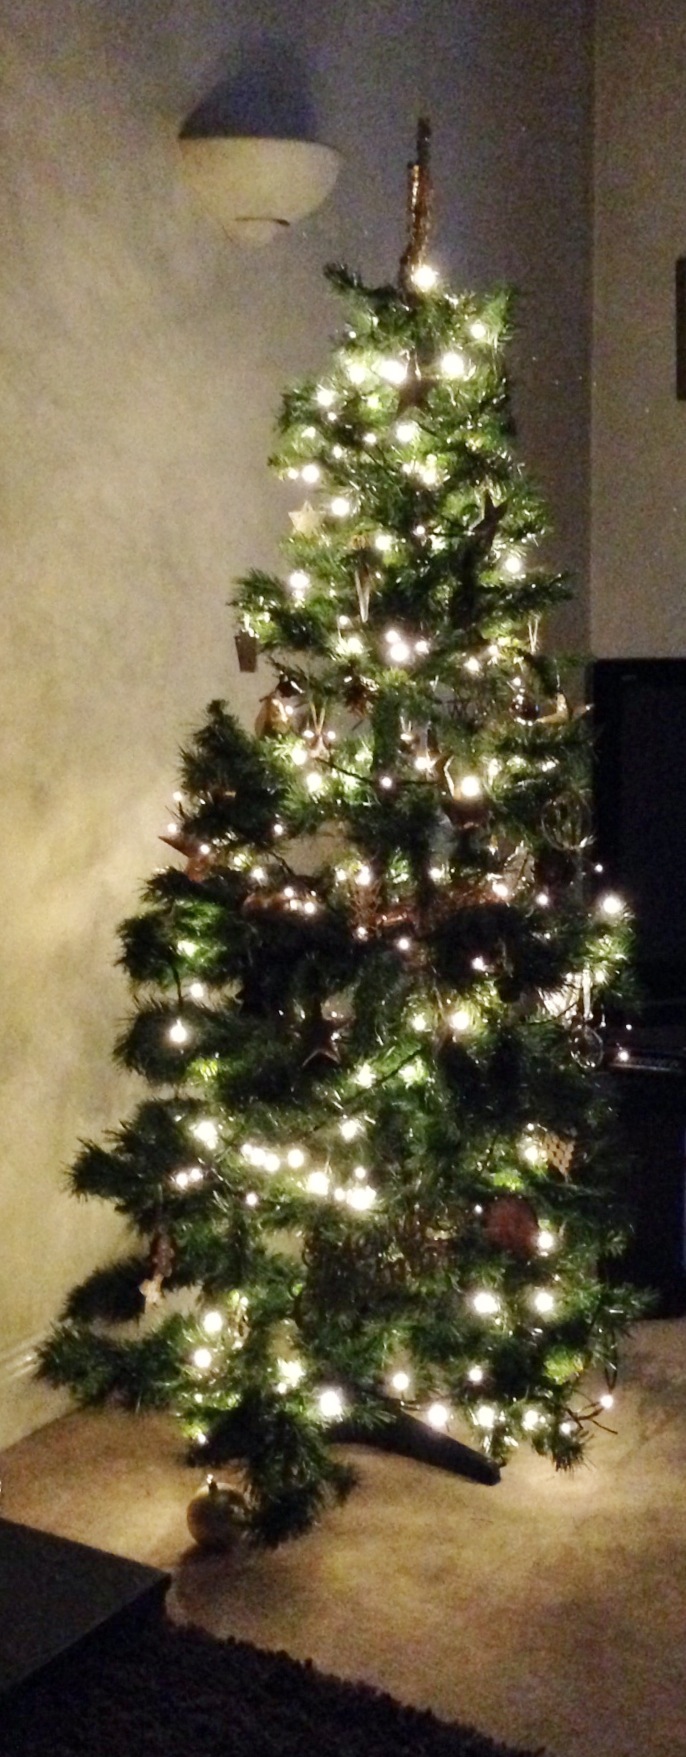 11 December – more Christmas Trees